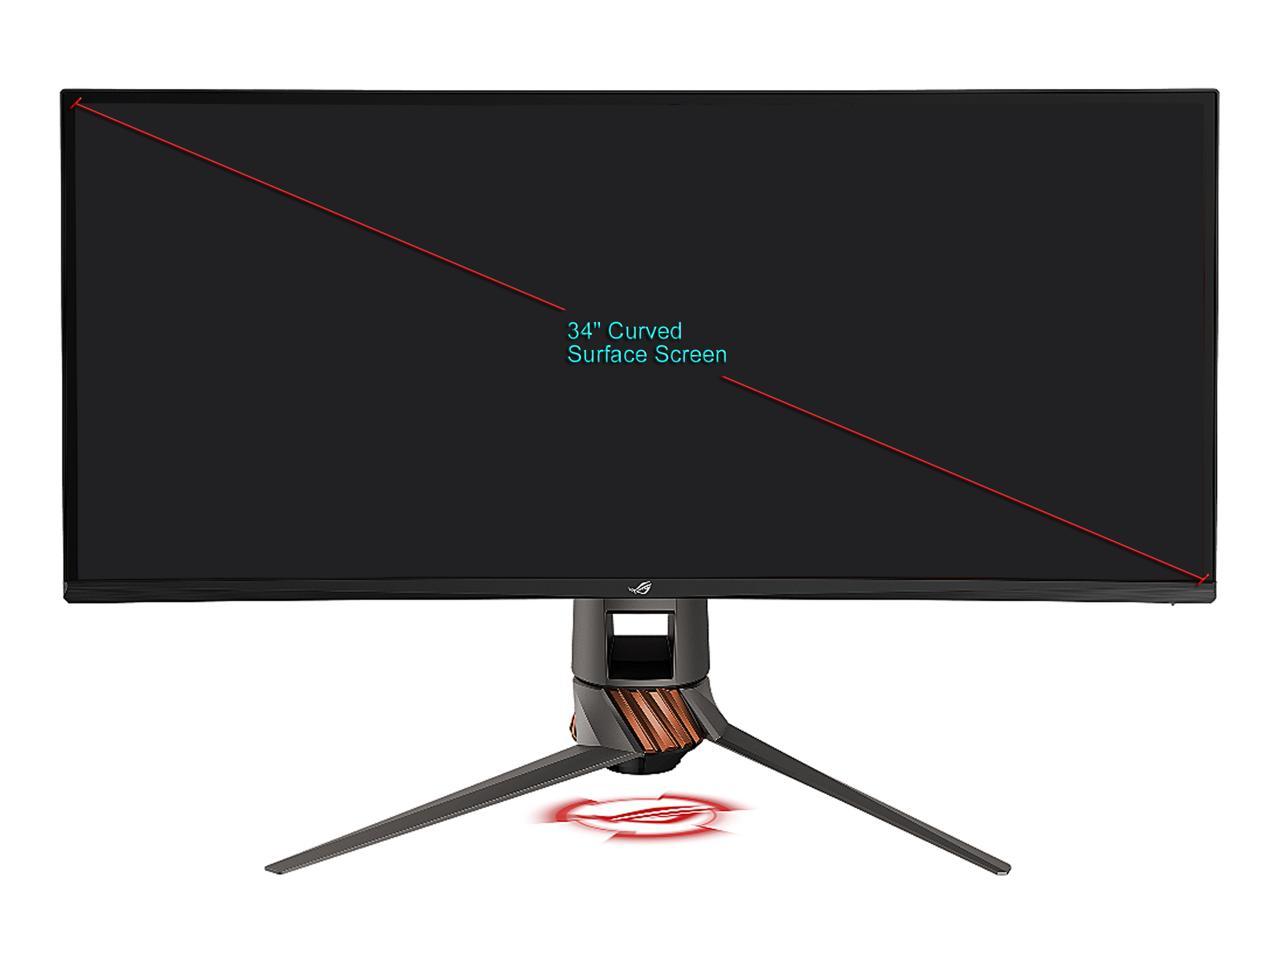 ASUS ROG Swift PG349Q Ultra-wide Curved Gaming Monitor - 34" 21:9 Ultra-wide QHD (3440 x 1440), Overclockable 120Hz , G-SYNC